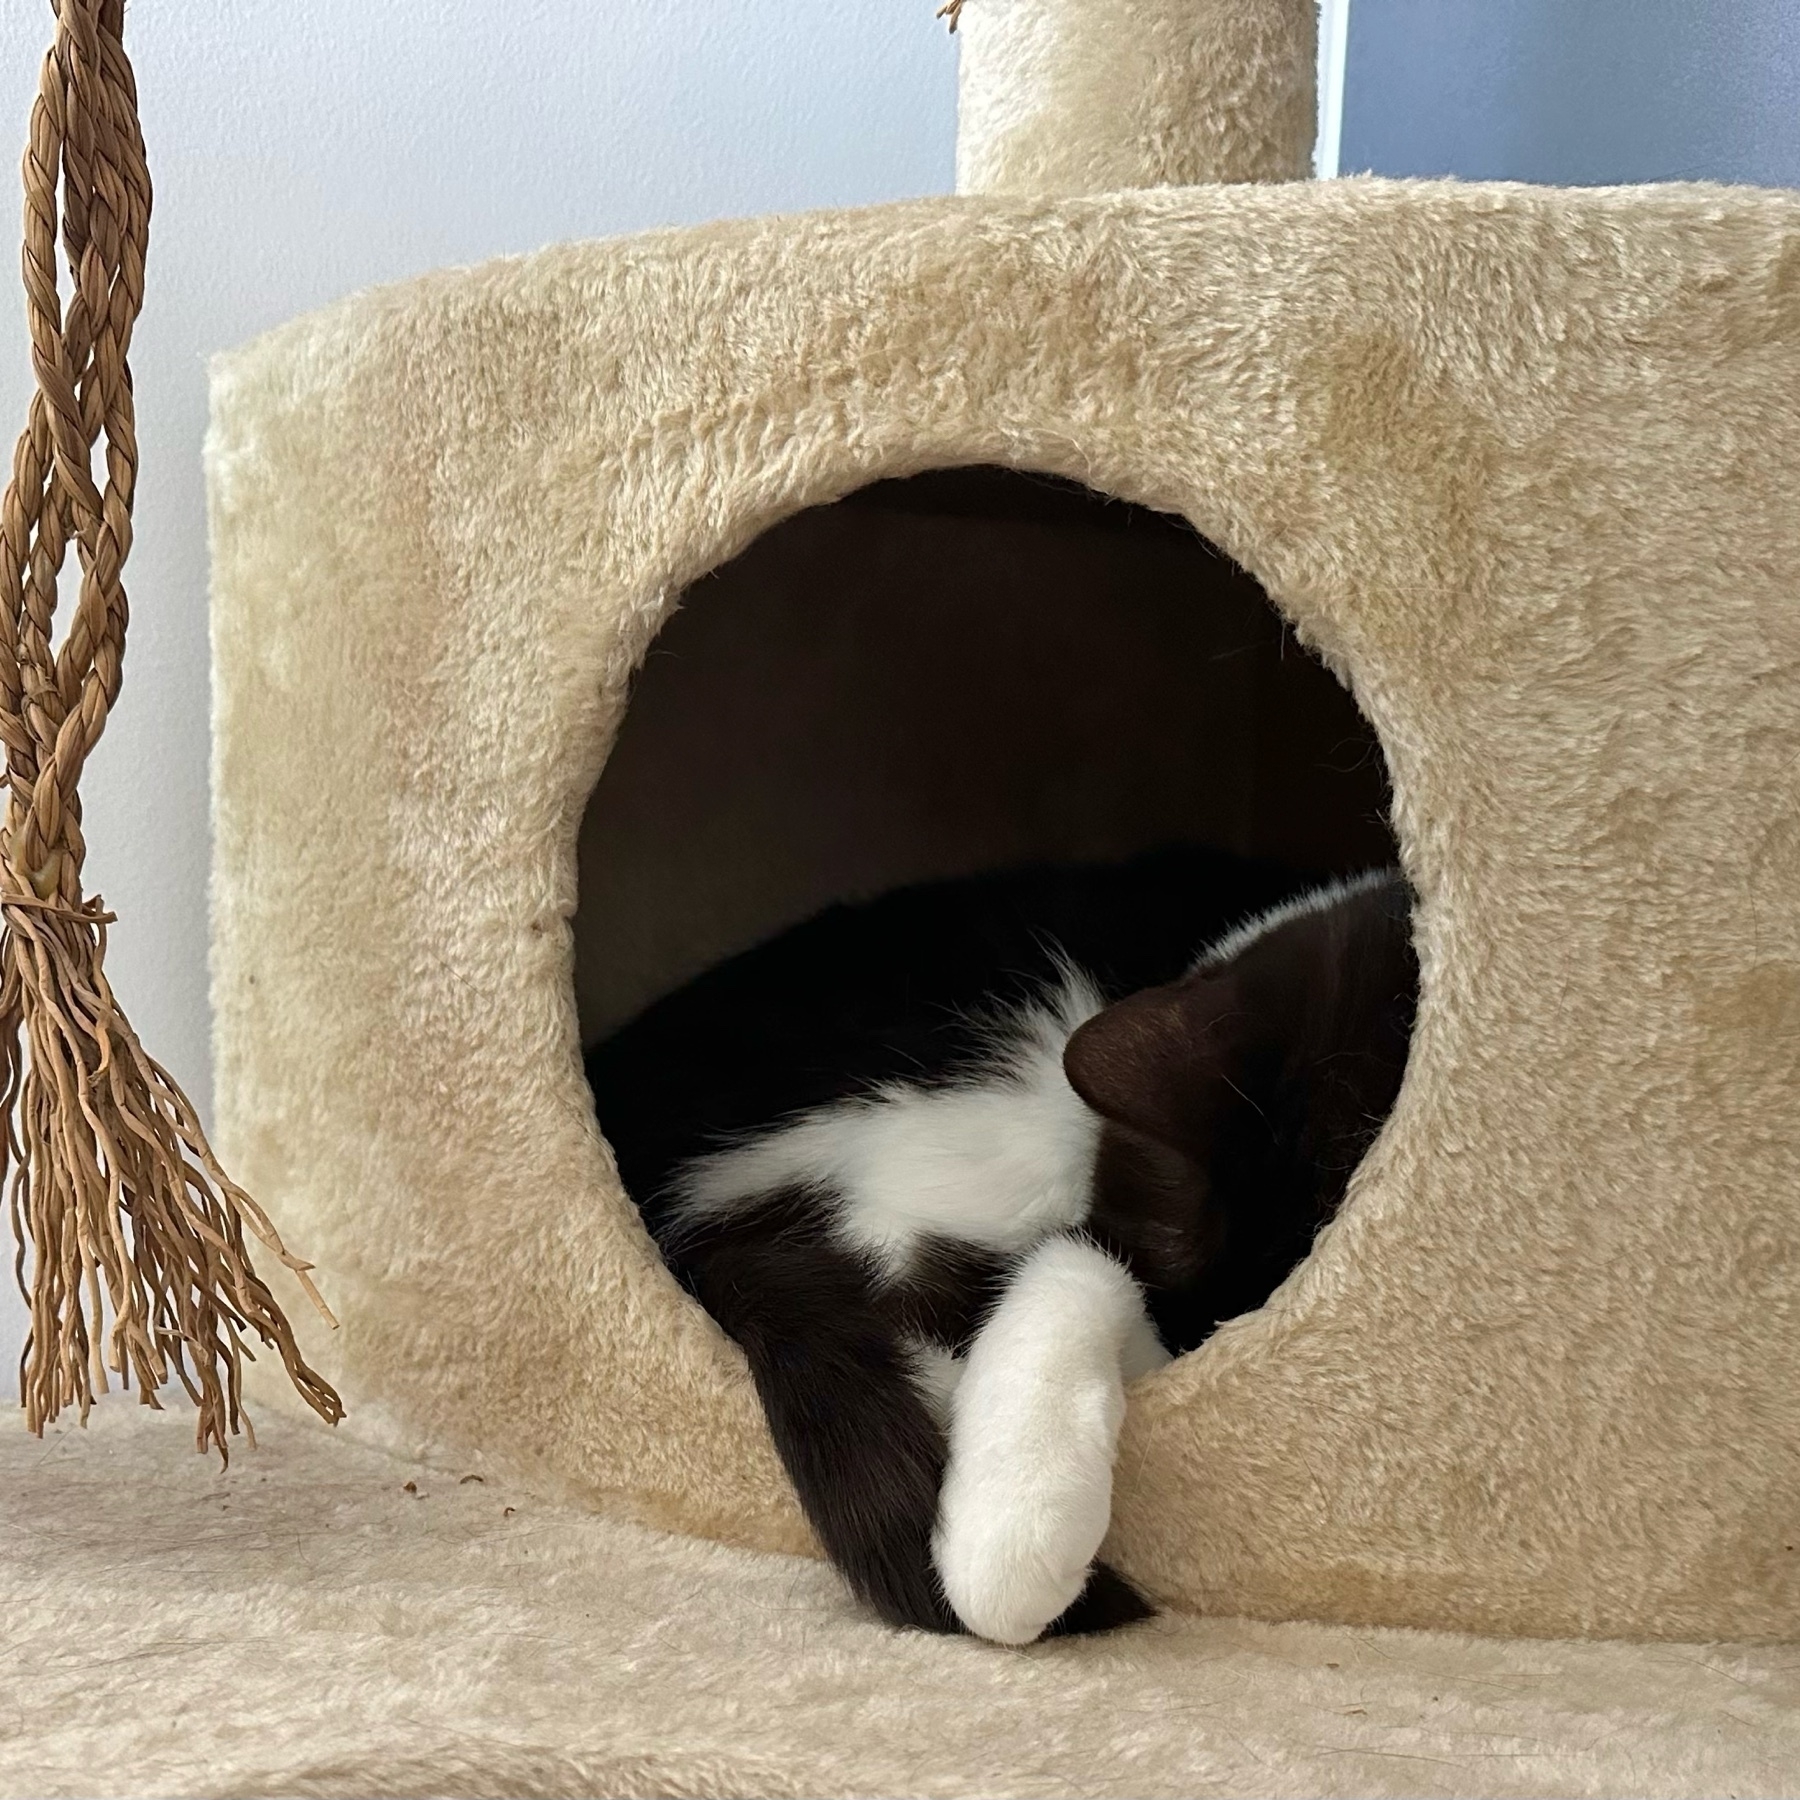 A black and white cat asleep inside the box part of a scratching post. One white paw and black tail draped over the circular entry hole.